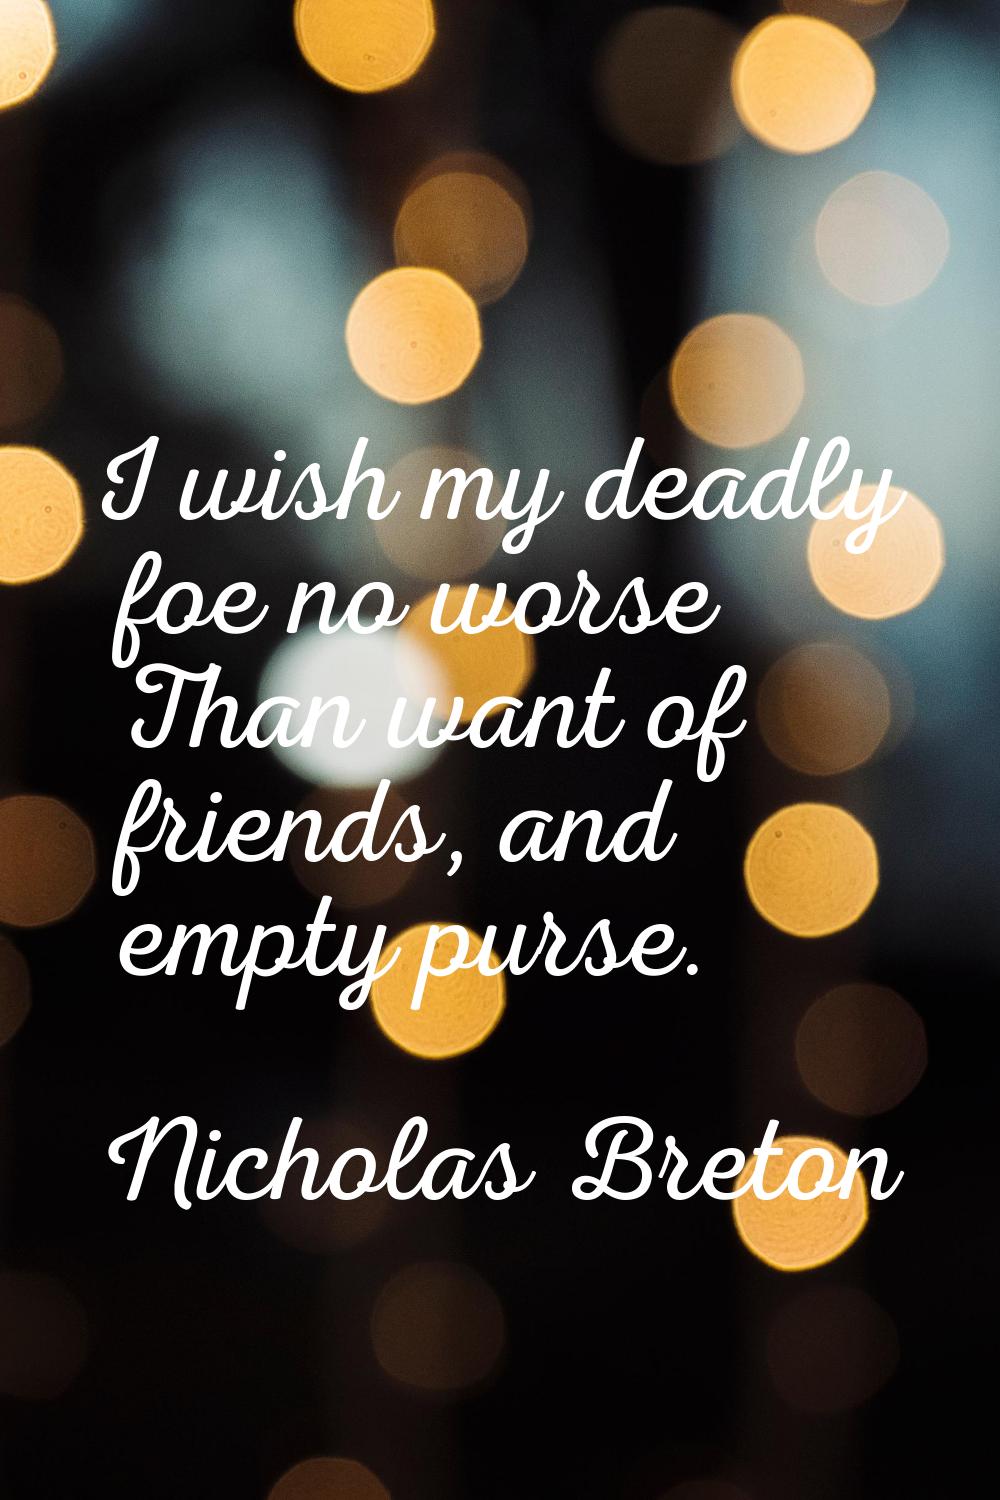 I wish my deadly foe no worse Than want of friends, and empty purse.